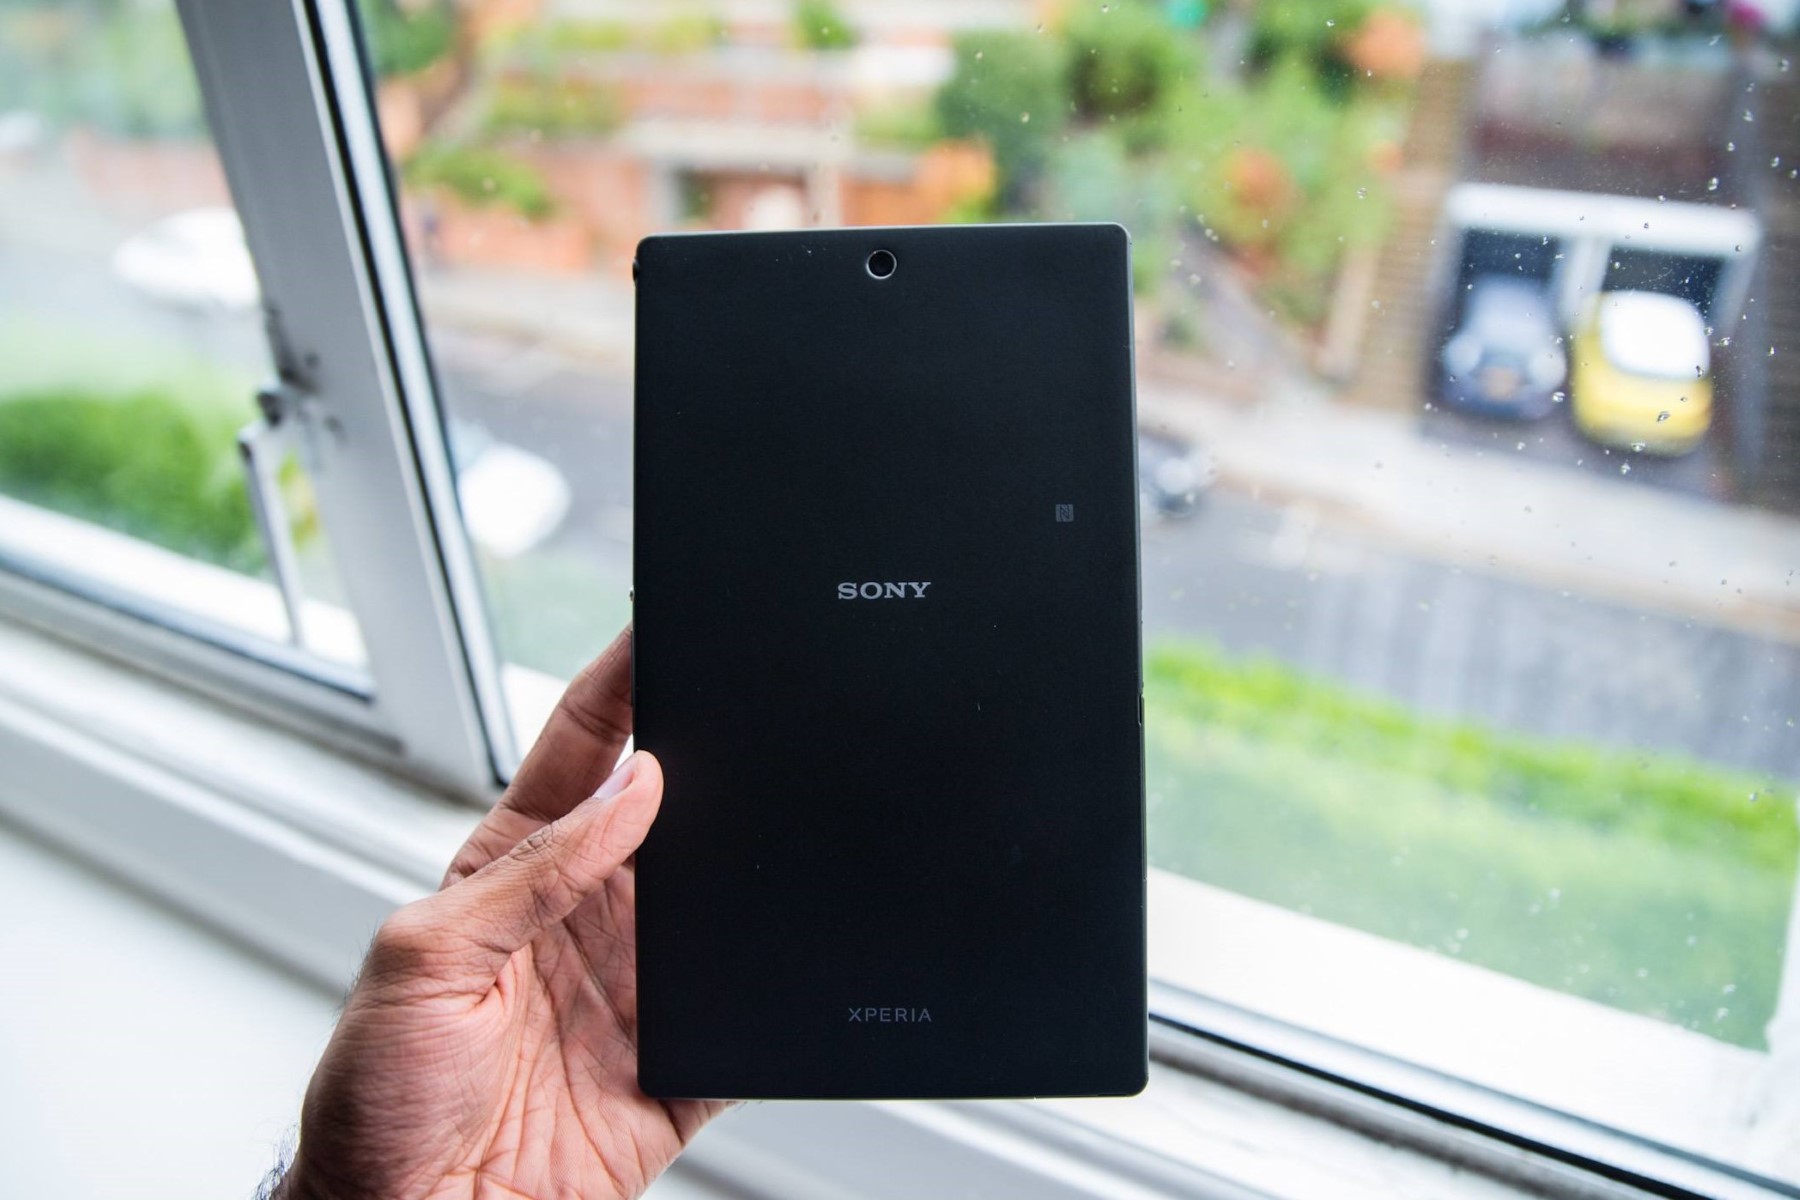 xperia-z3-tablet-camera-issue-troubleshooting-and-fixes